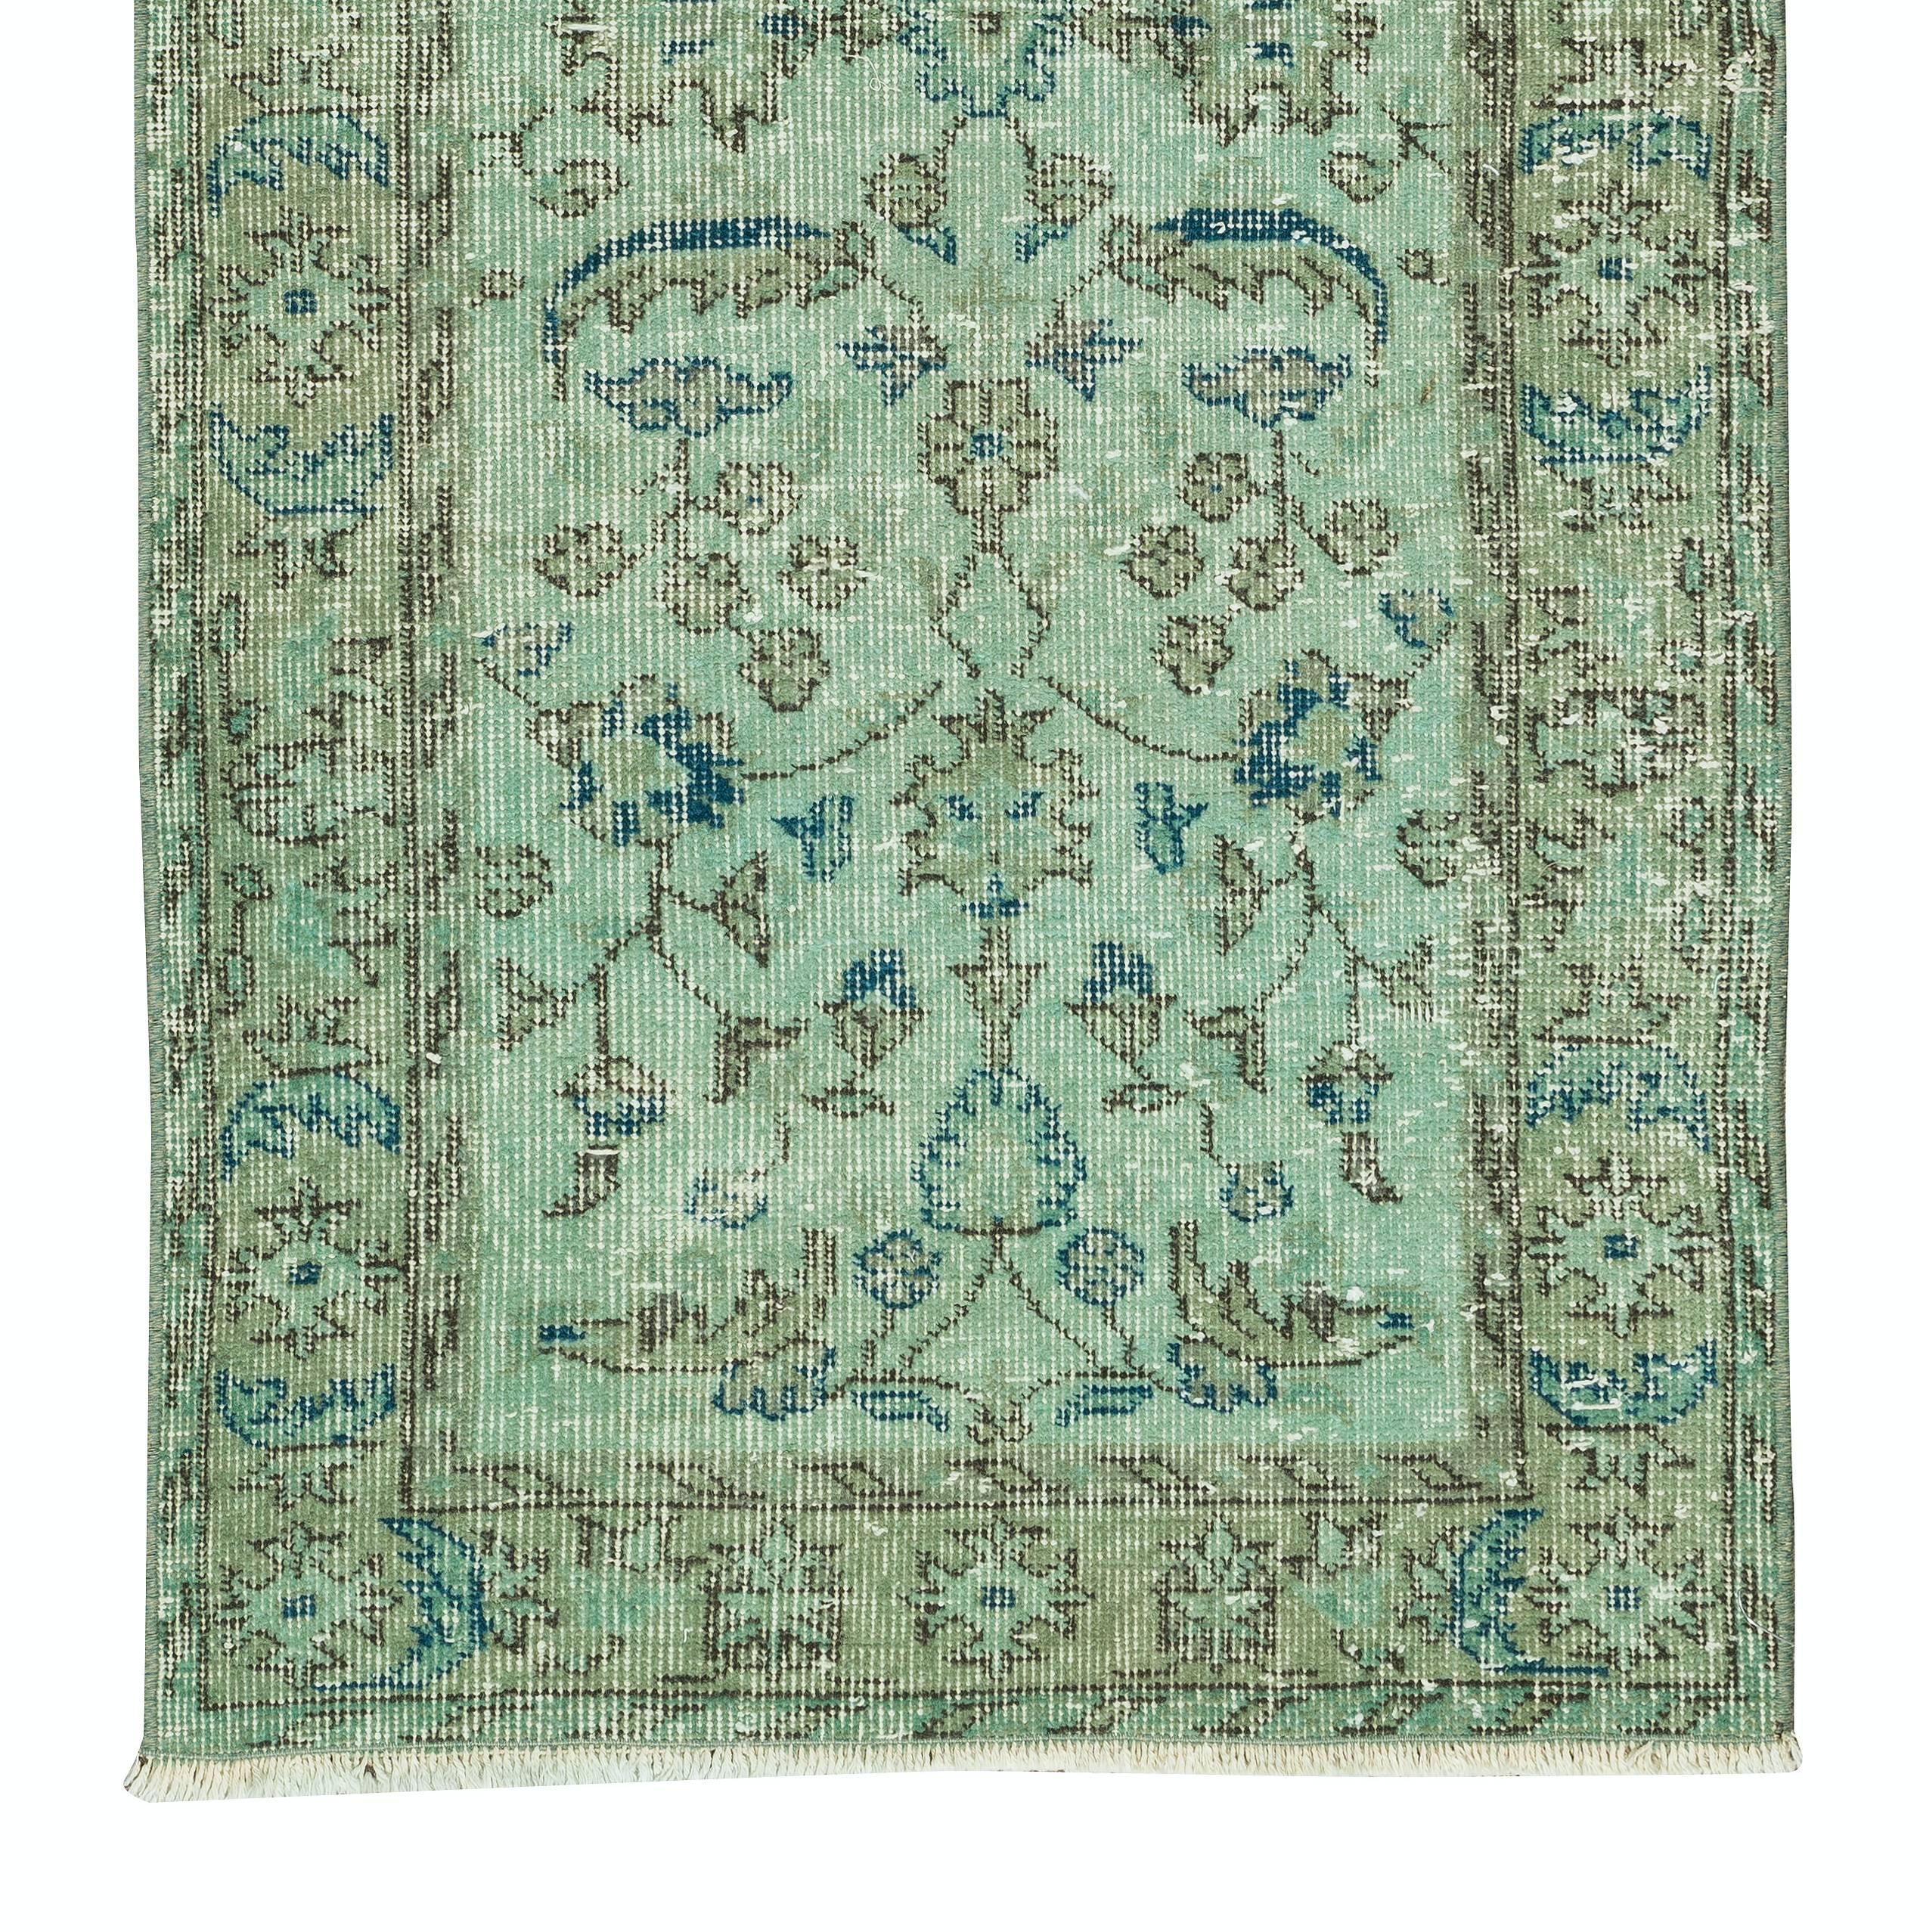 20th Century 2.4x5 Ft Handmade Vintage Turkish Accent Rug Re-Dyed in Green 4 Modern Interiors